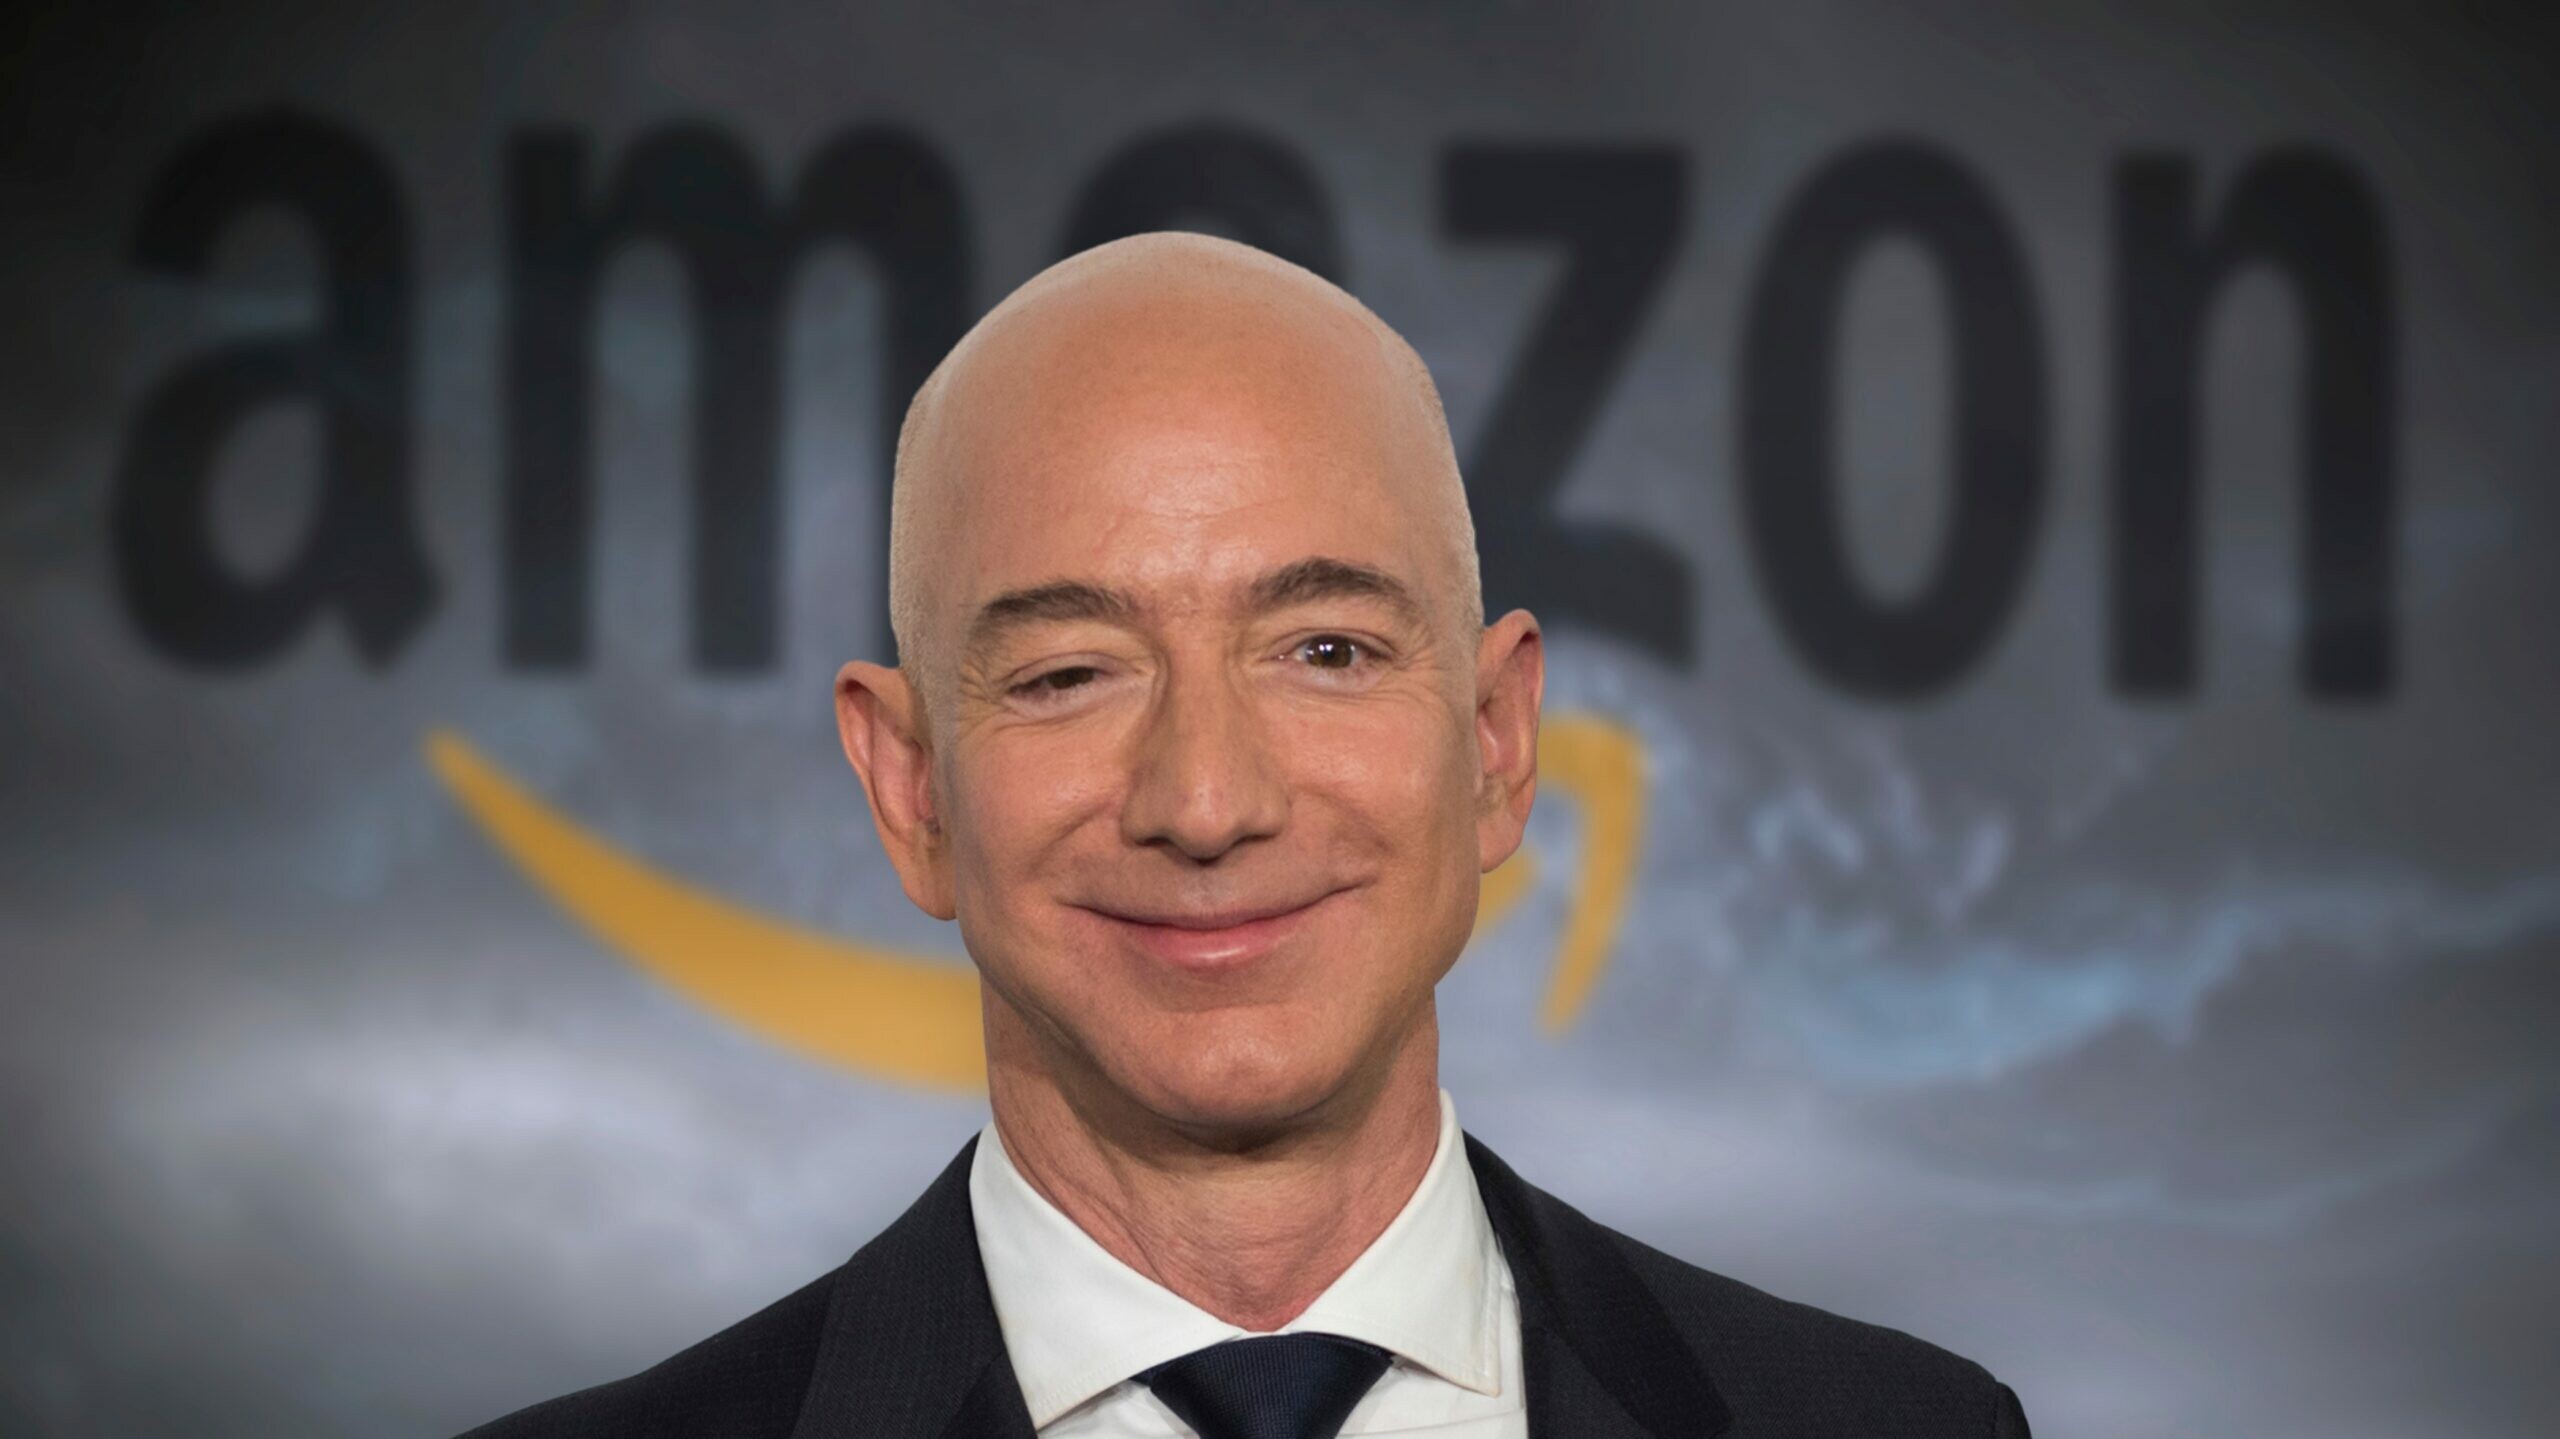 Jeff Bezos: The first person in modern history to accumulate a fortune of over $100 billion. 2560x1440 HD Wallpaper.